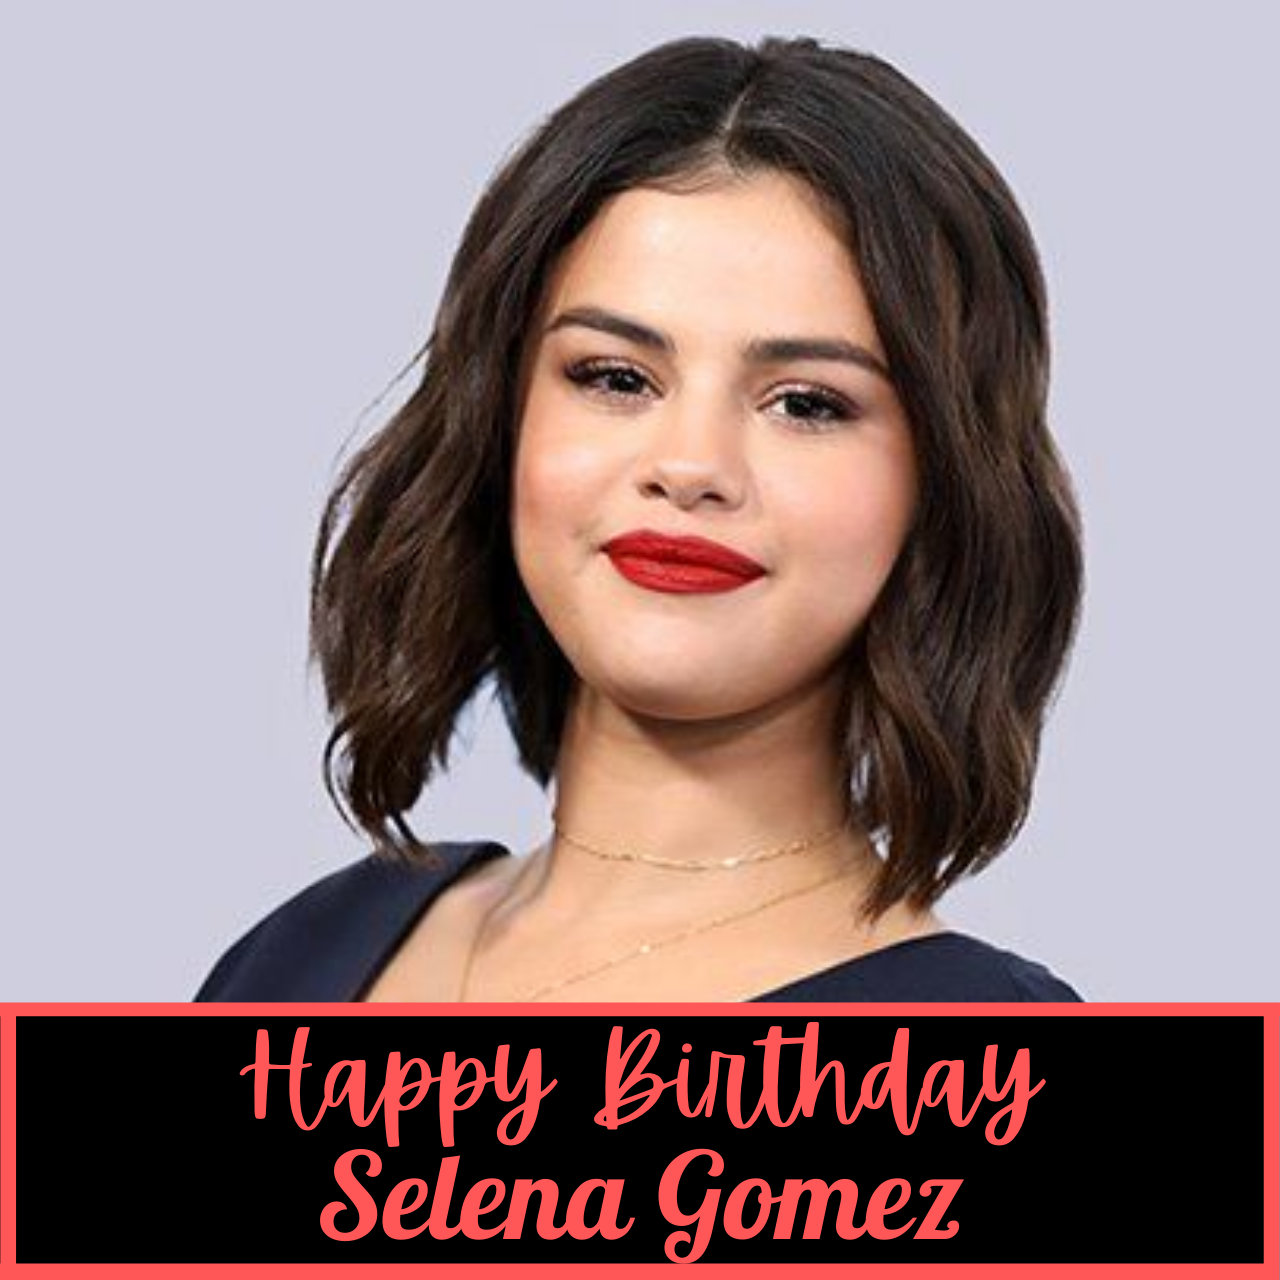 Happy Birthday Selena Gomez Wishes, Images, Messages, and Song Video to Download to greet American Singer